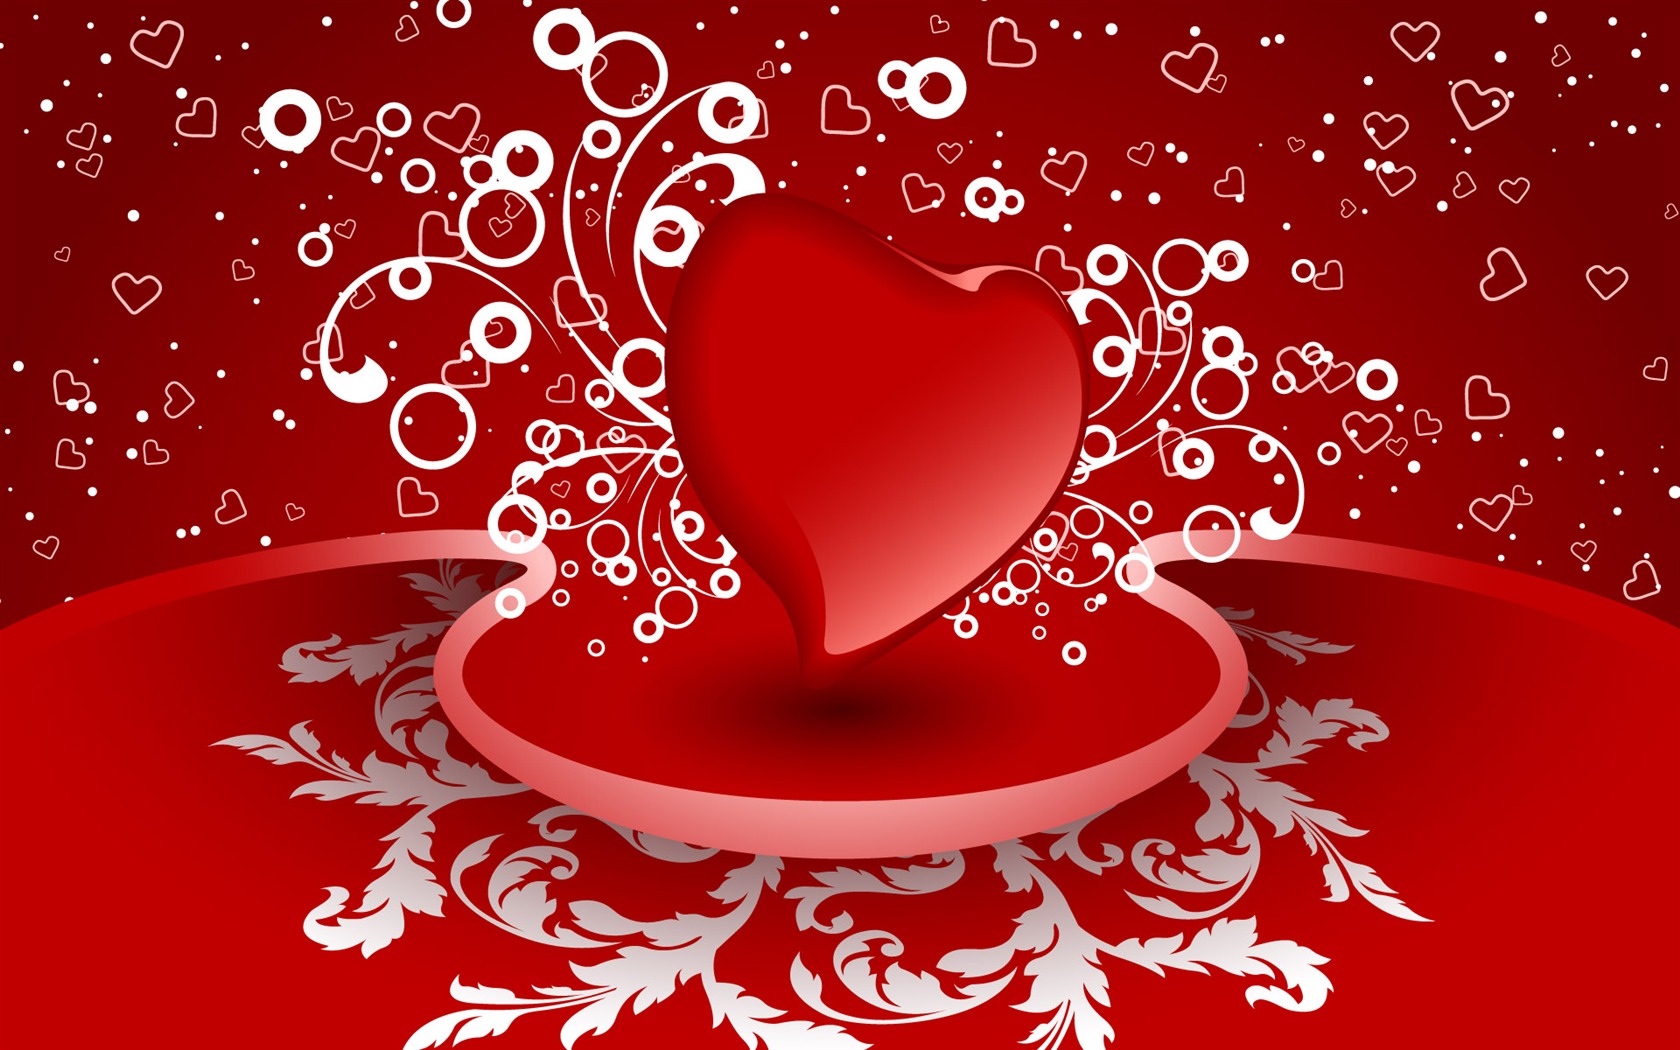 Valentine's Day Love Theme Wallpapers (2) #8 - 1680x1050